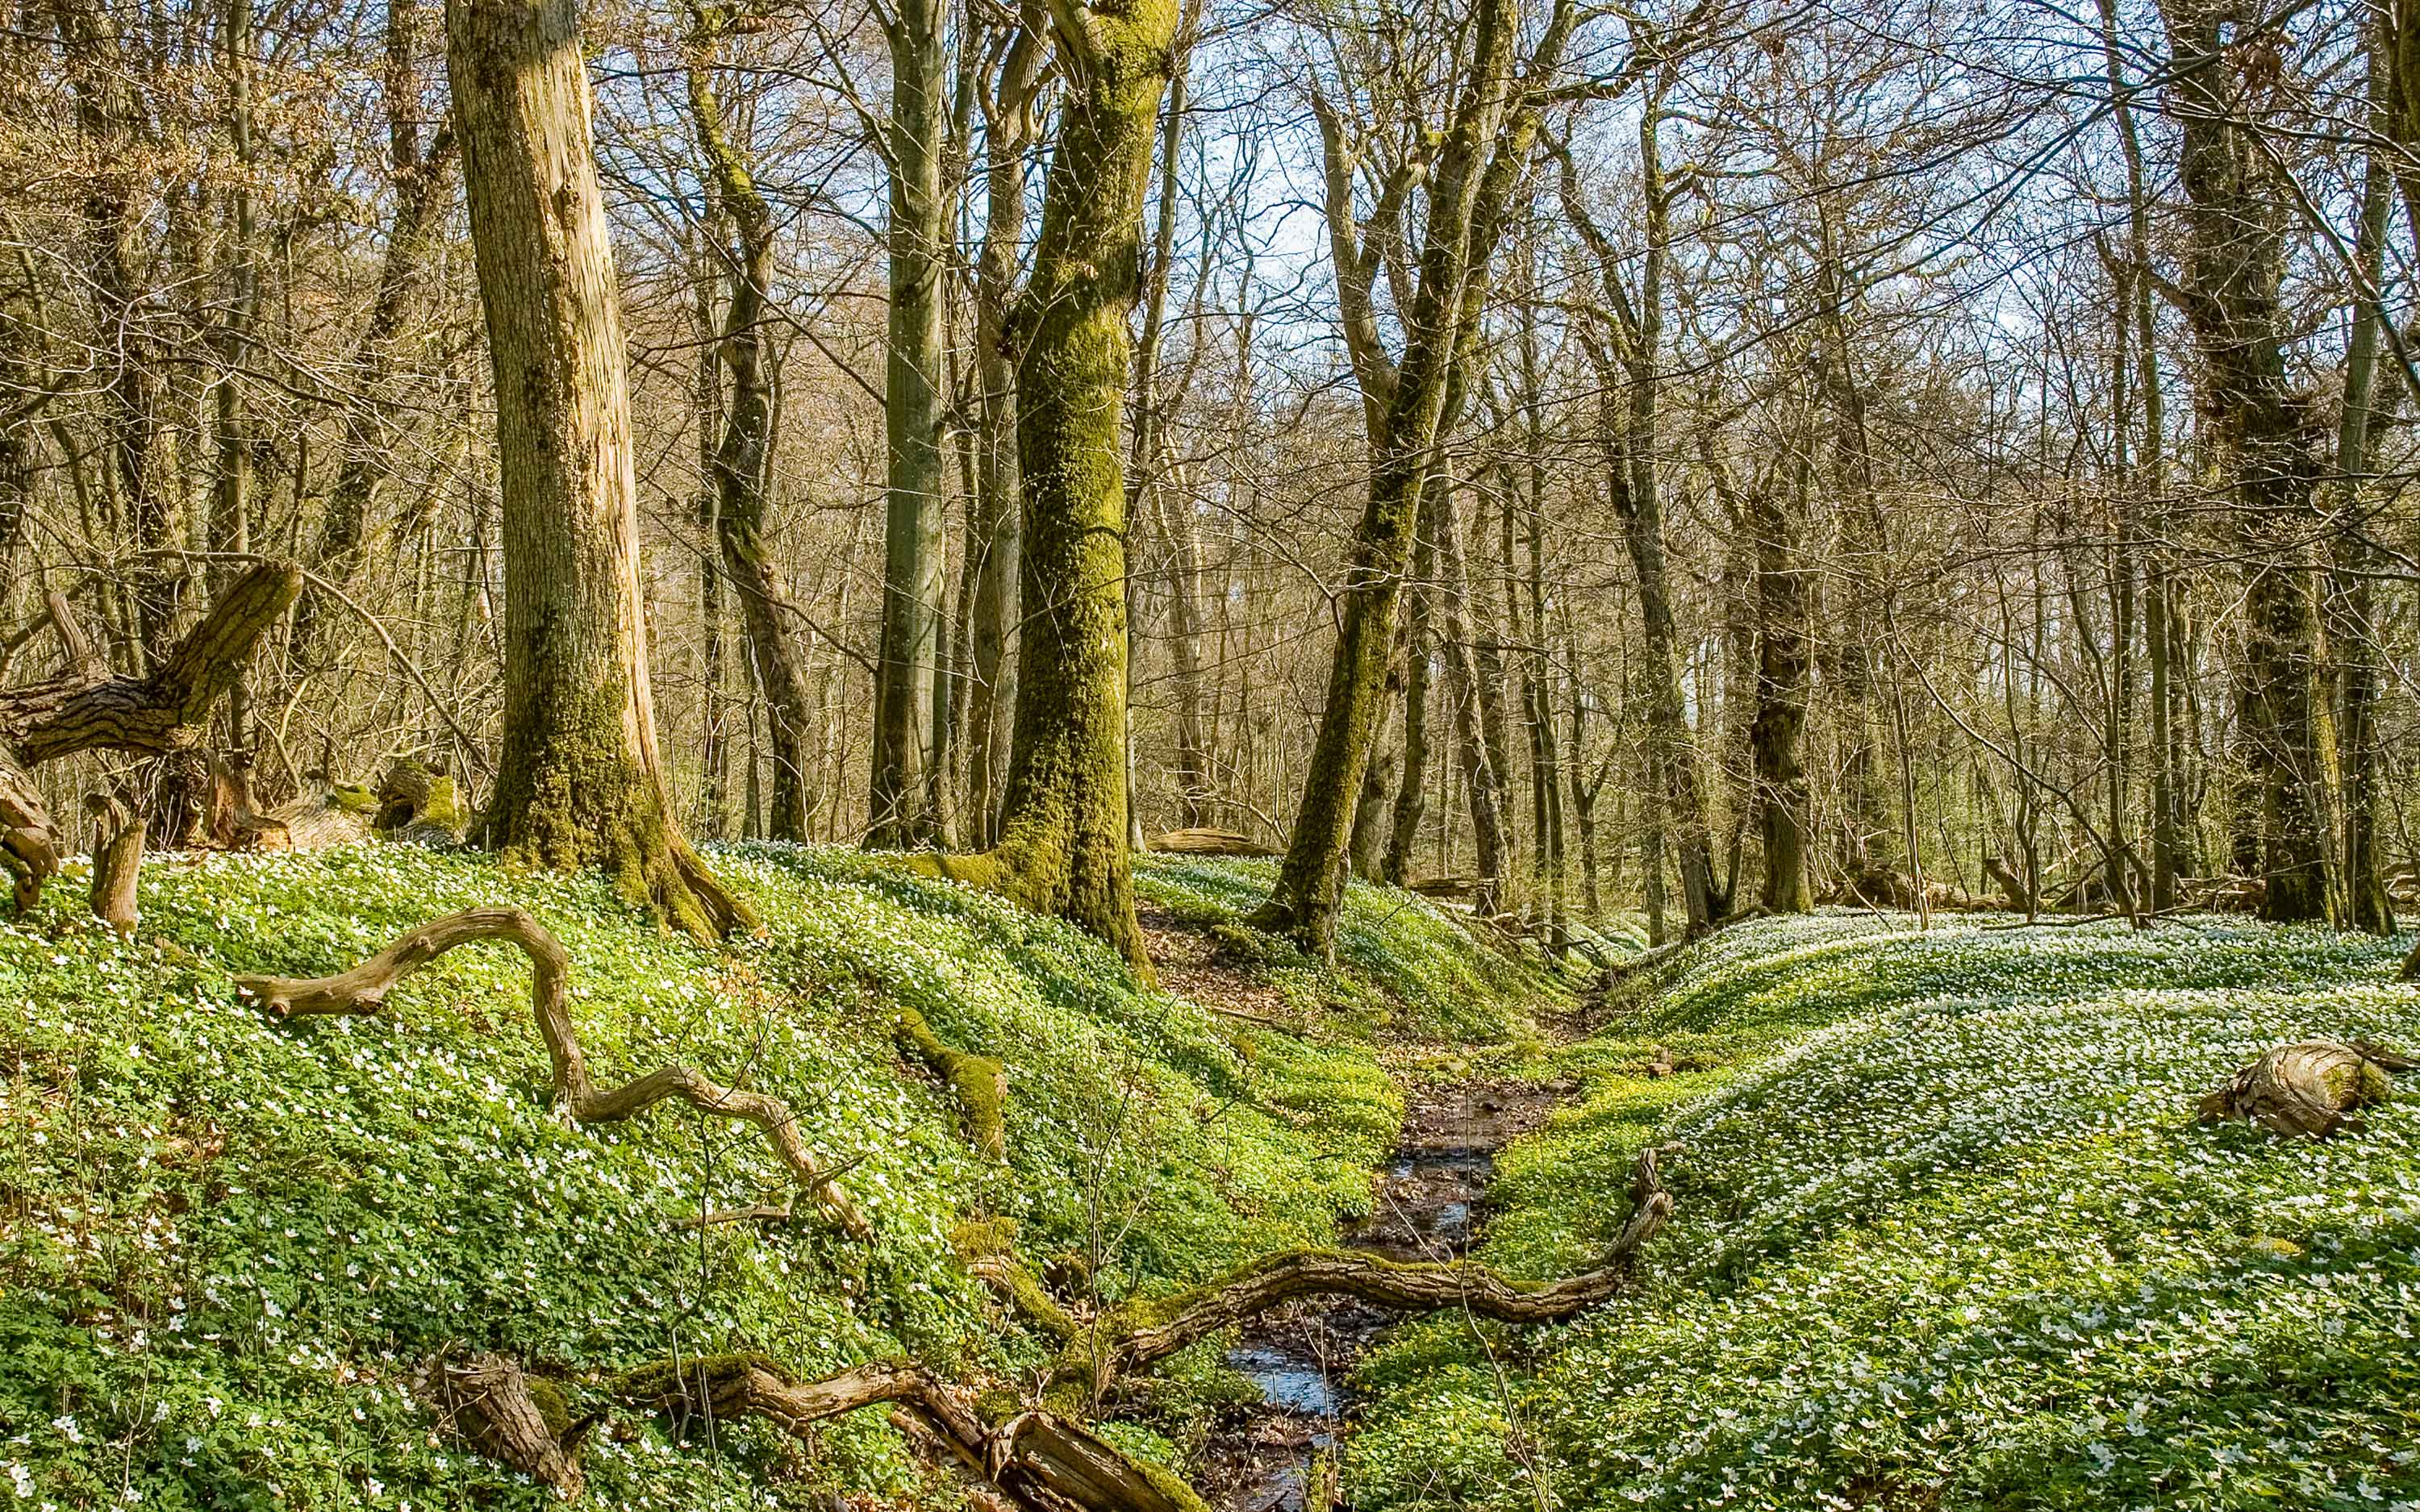 Sheer greenery on the trees, wood anemones on the ground, a crooked tree trunk.